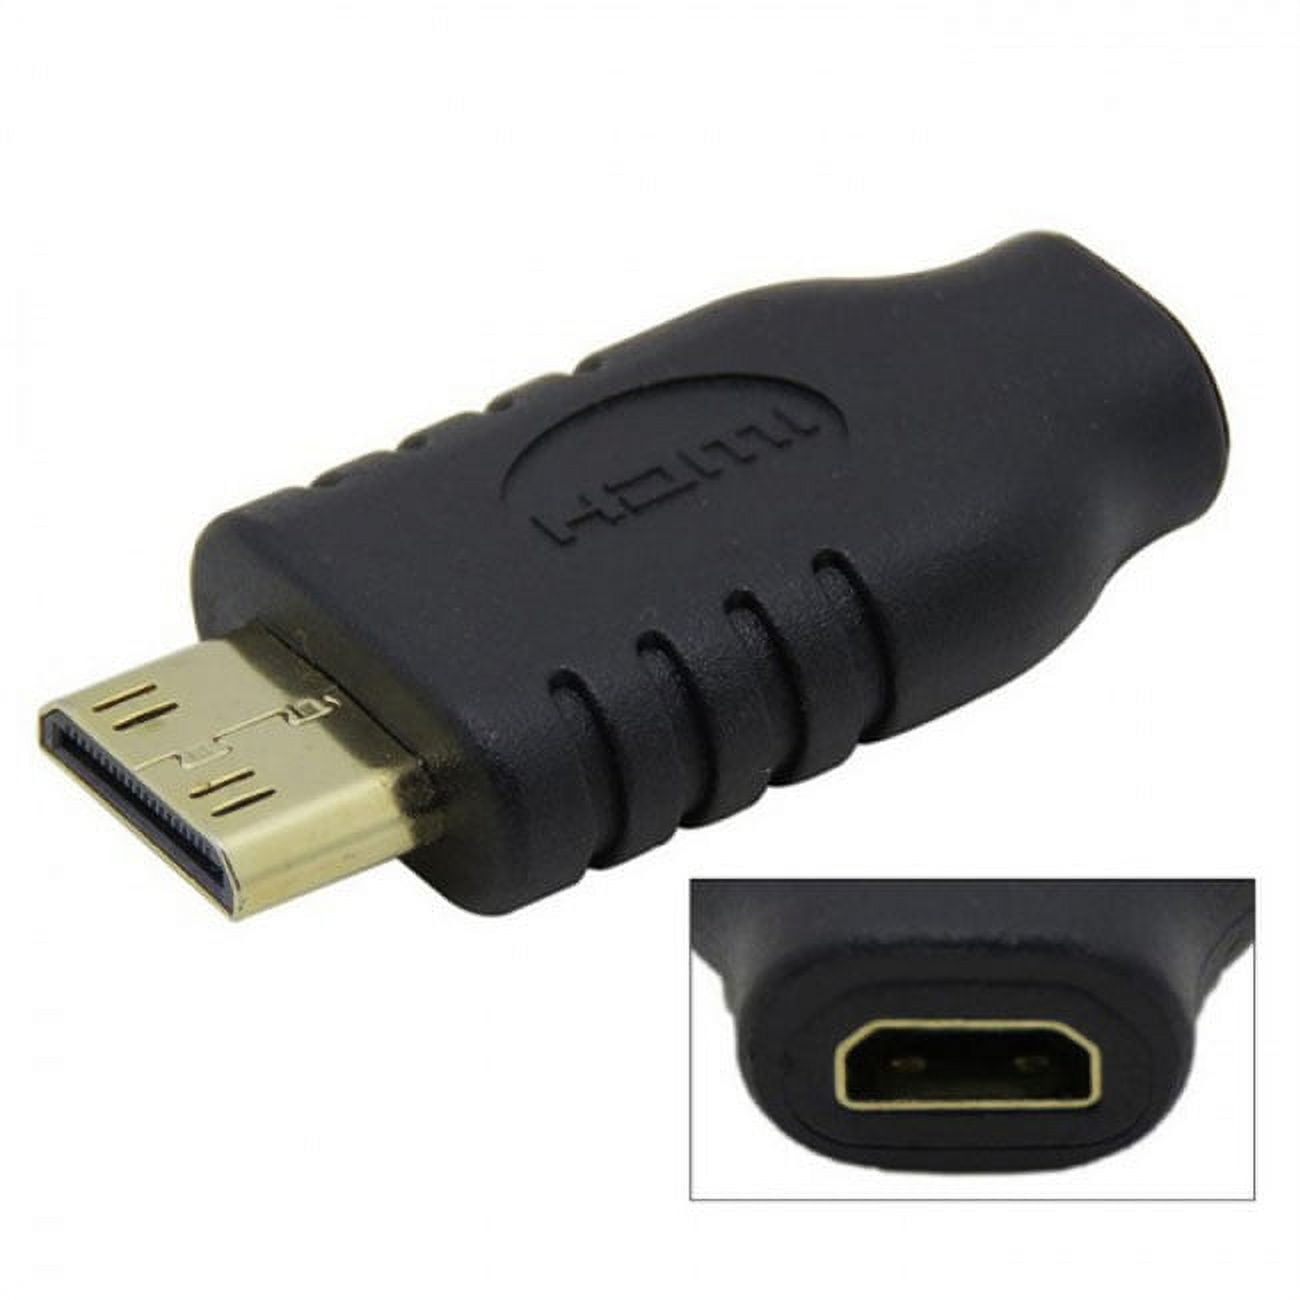 chenyang CY Type D Micro HDMI v1.4 Socket Female to Type C Mini HDMI Male  Convertor Adapter Cable 10cm